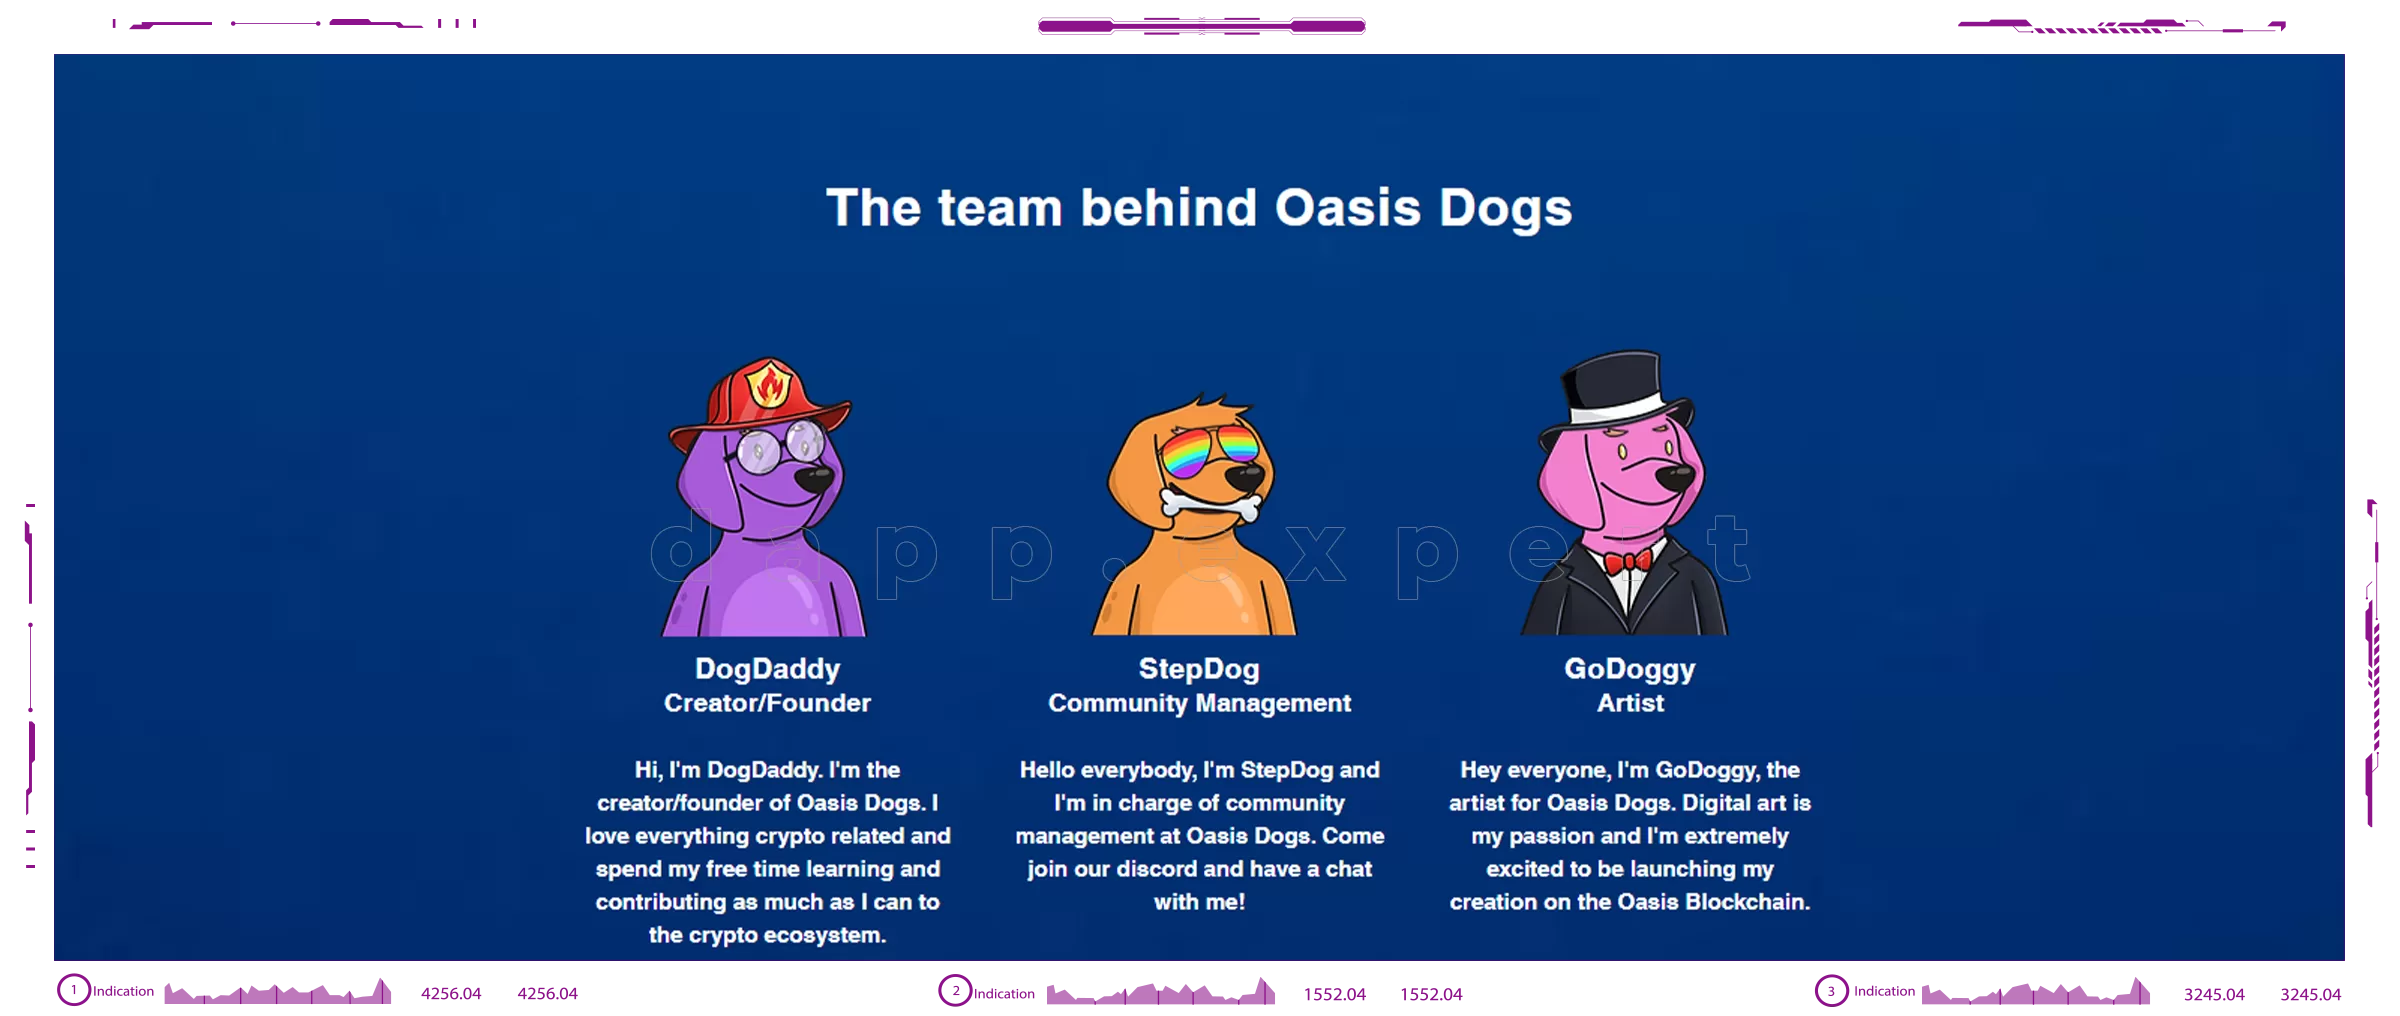 Oasis Dogs dapps